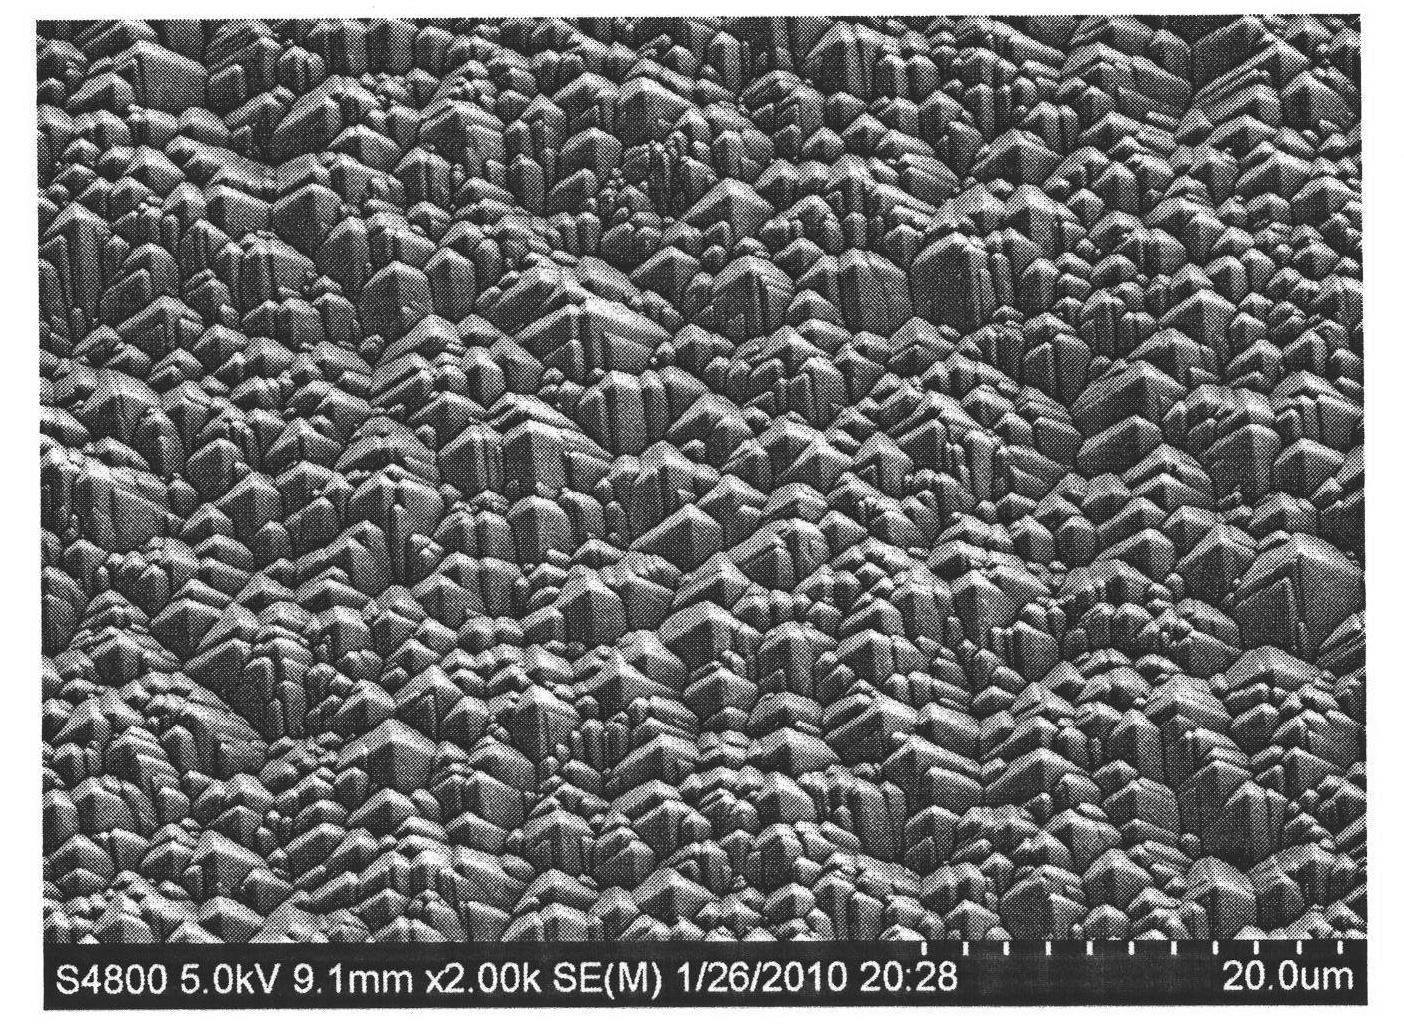 Additive of alkali wool making solution for monocrystalline silicon pieces and using method